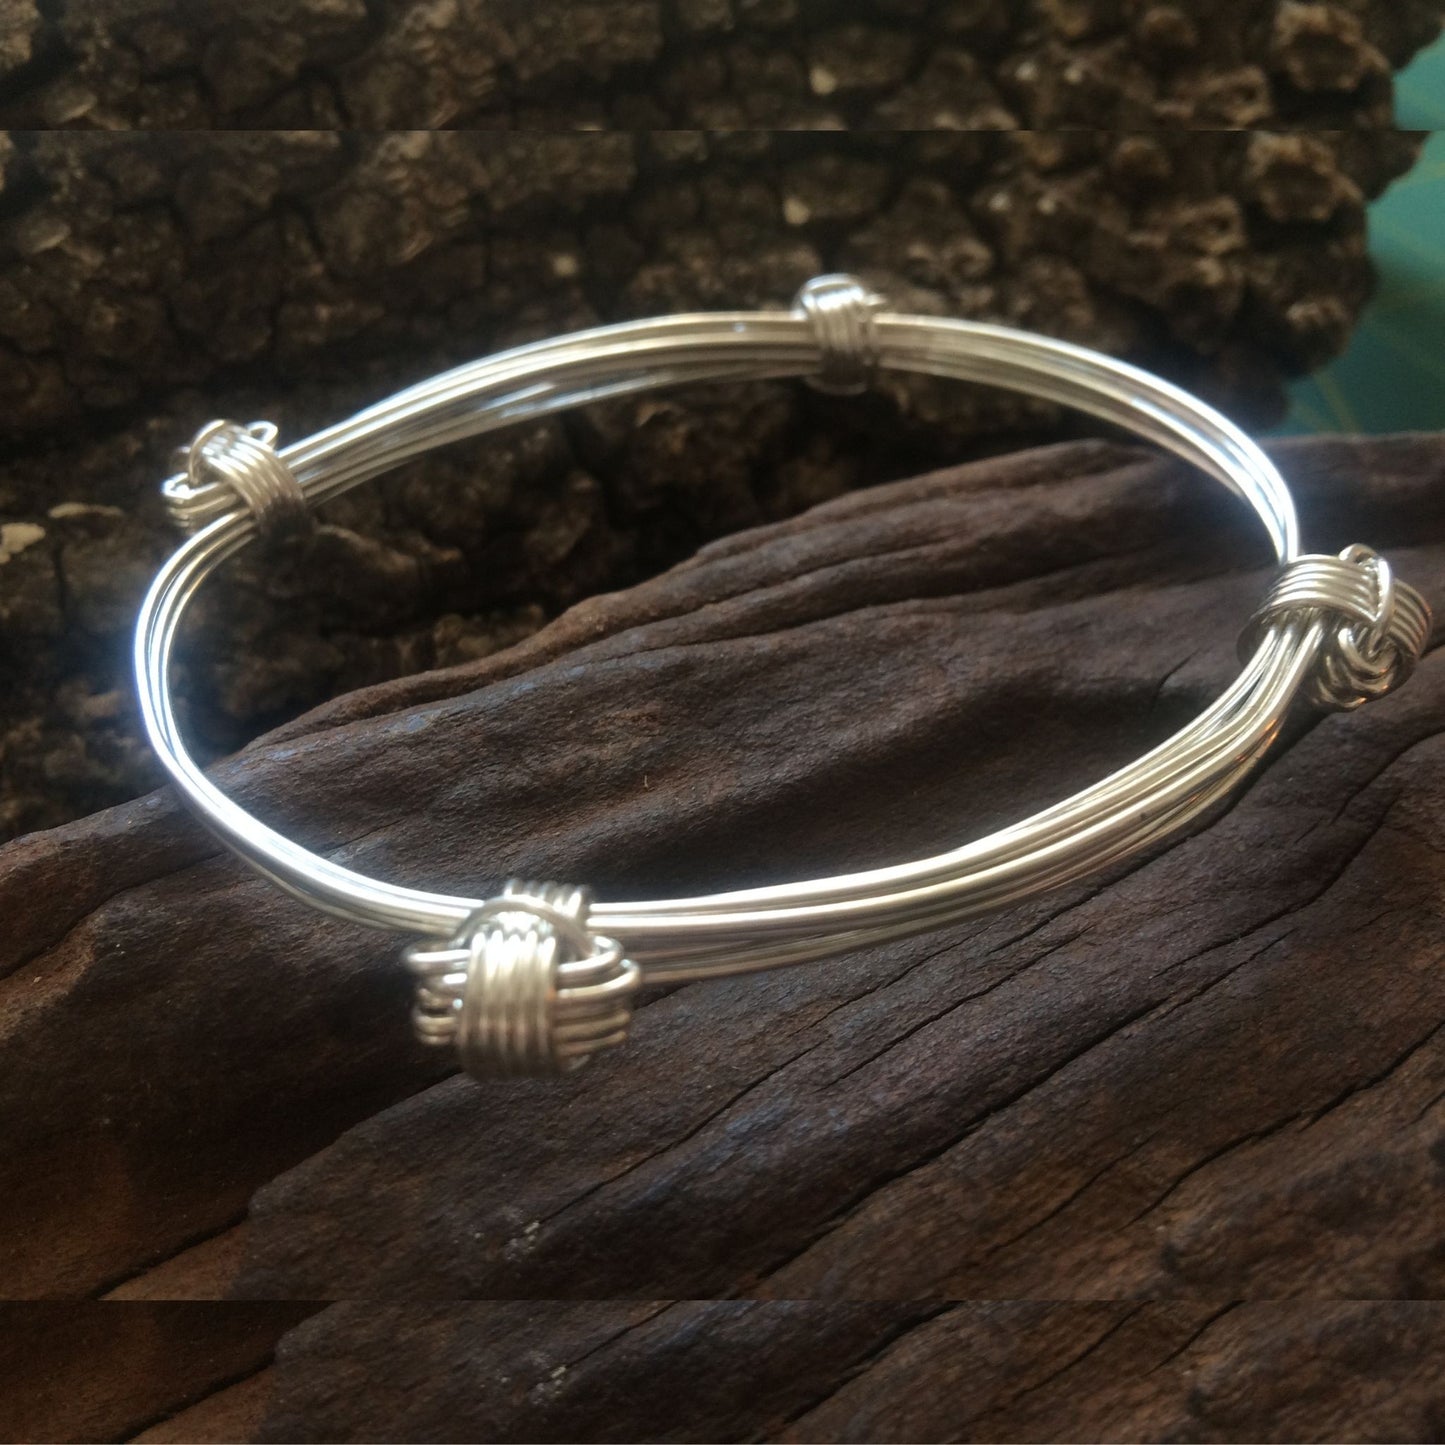 Elephant knot silver Bangle made by the Zuri Collection 